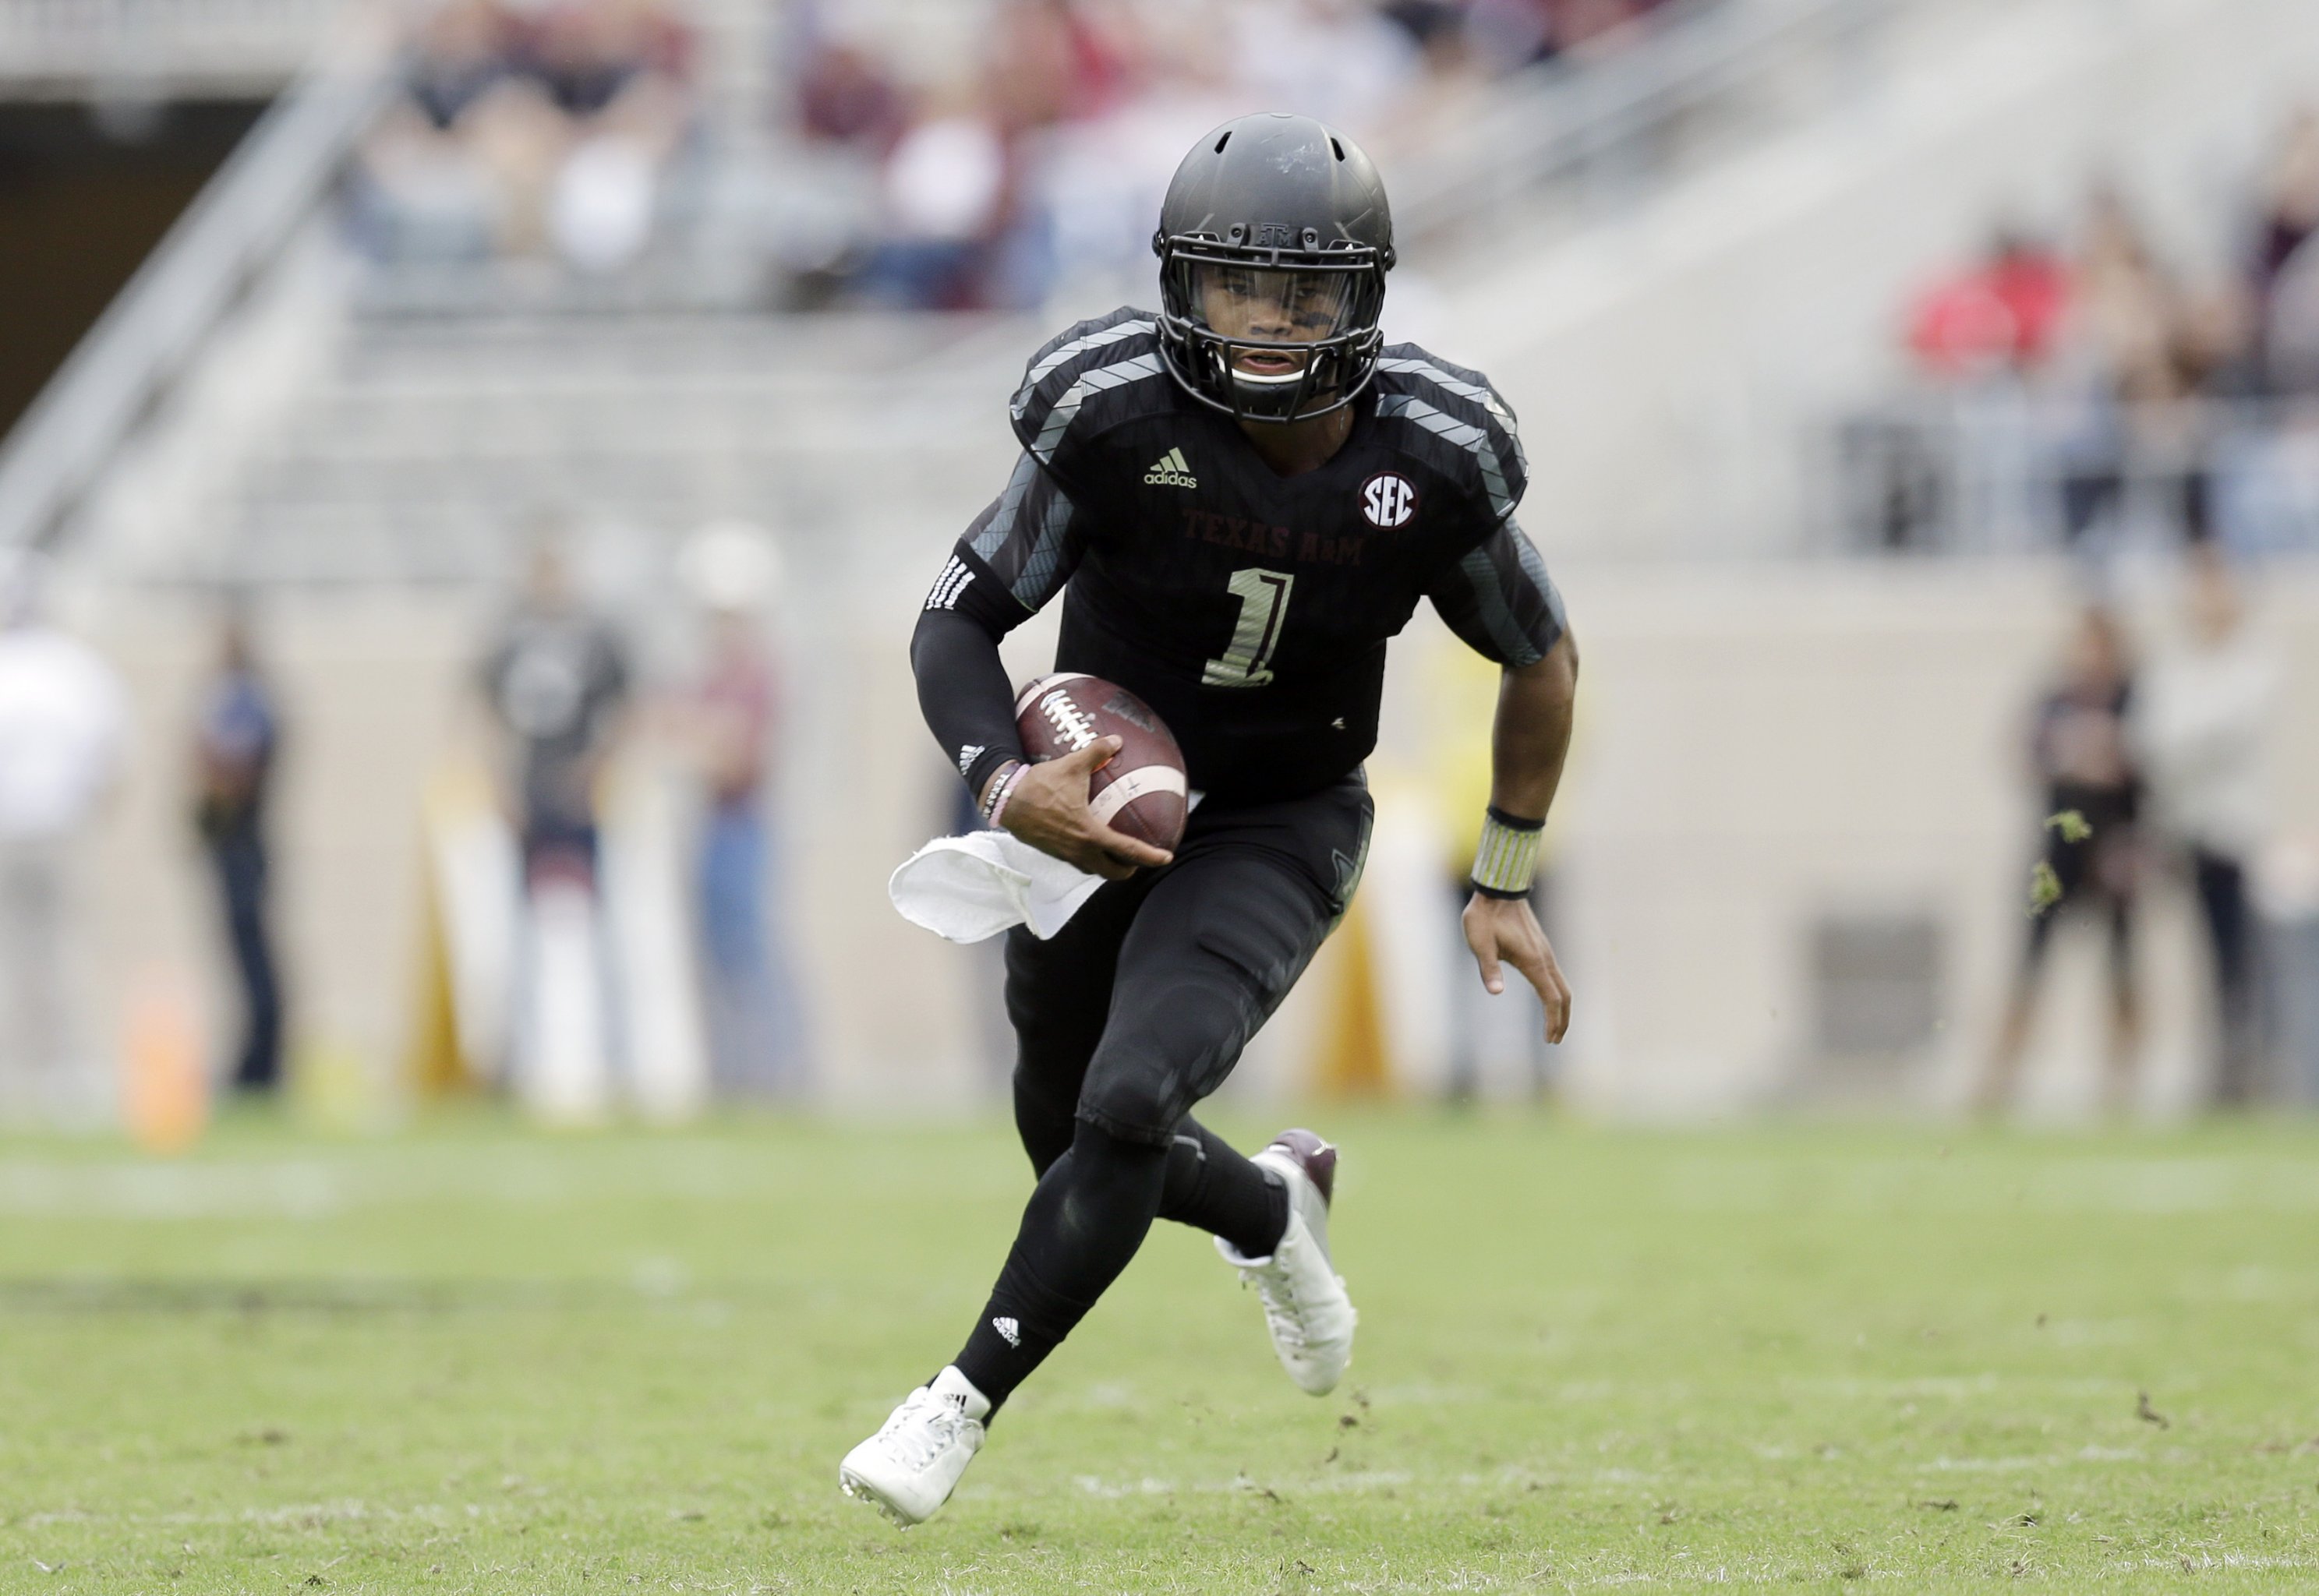 Kyler Murray chose NFL after Billy Beane said there was no decision